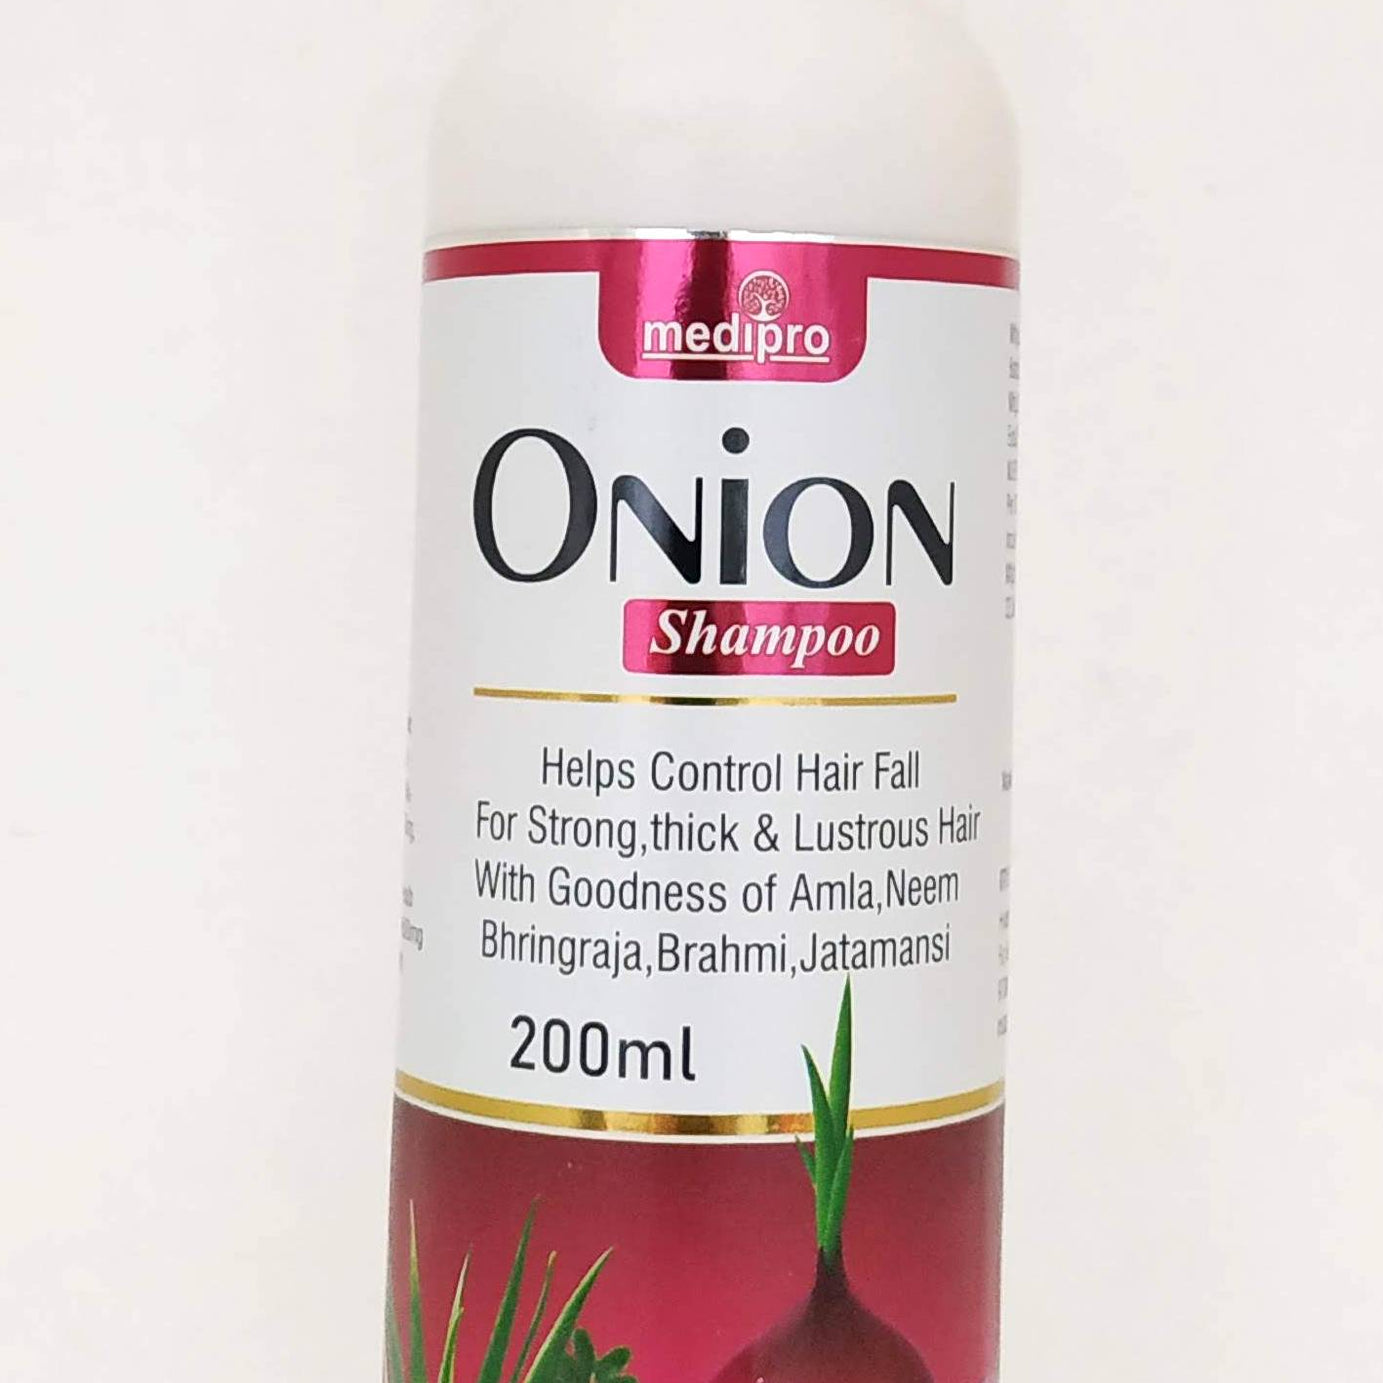 Shop Onion shampoo 200ml at price 270.00 from Medipro Online - Ayush Care